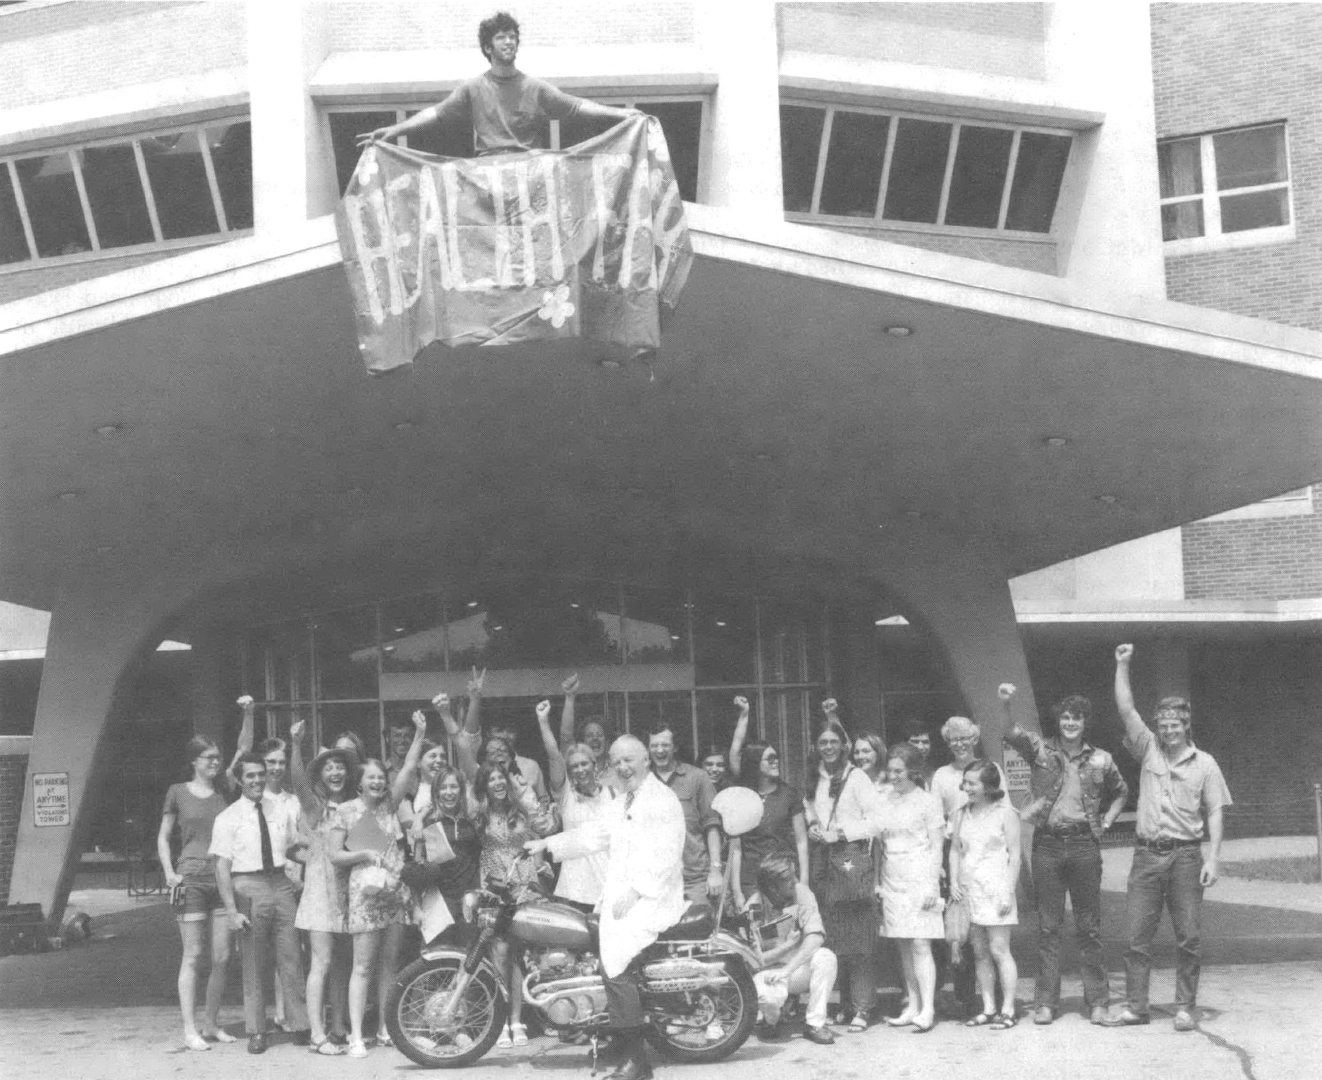 Black and white photo of group of people with fists raised standing in front of a building. A person standing on a balcony holds a banner